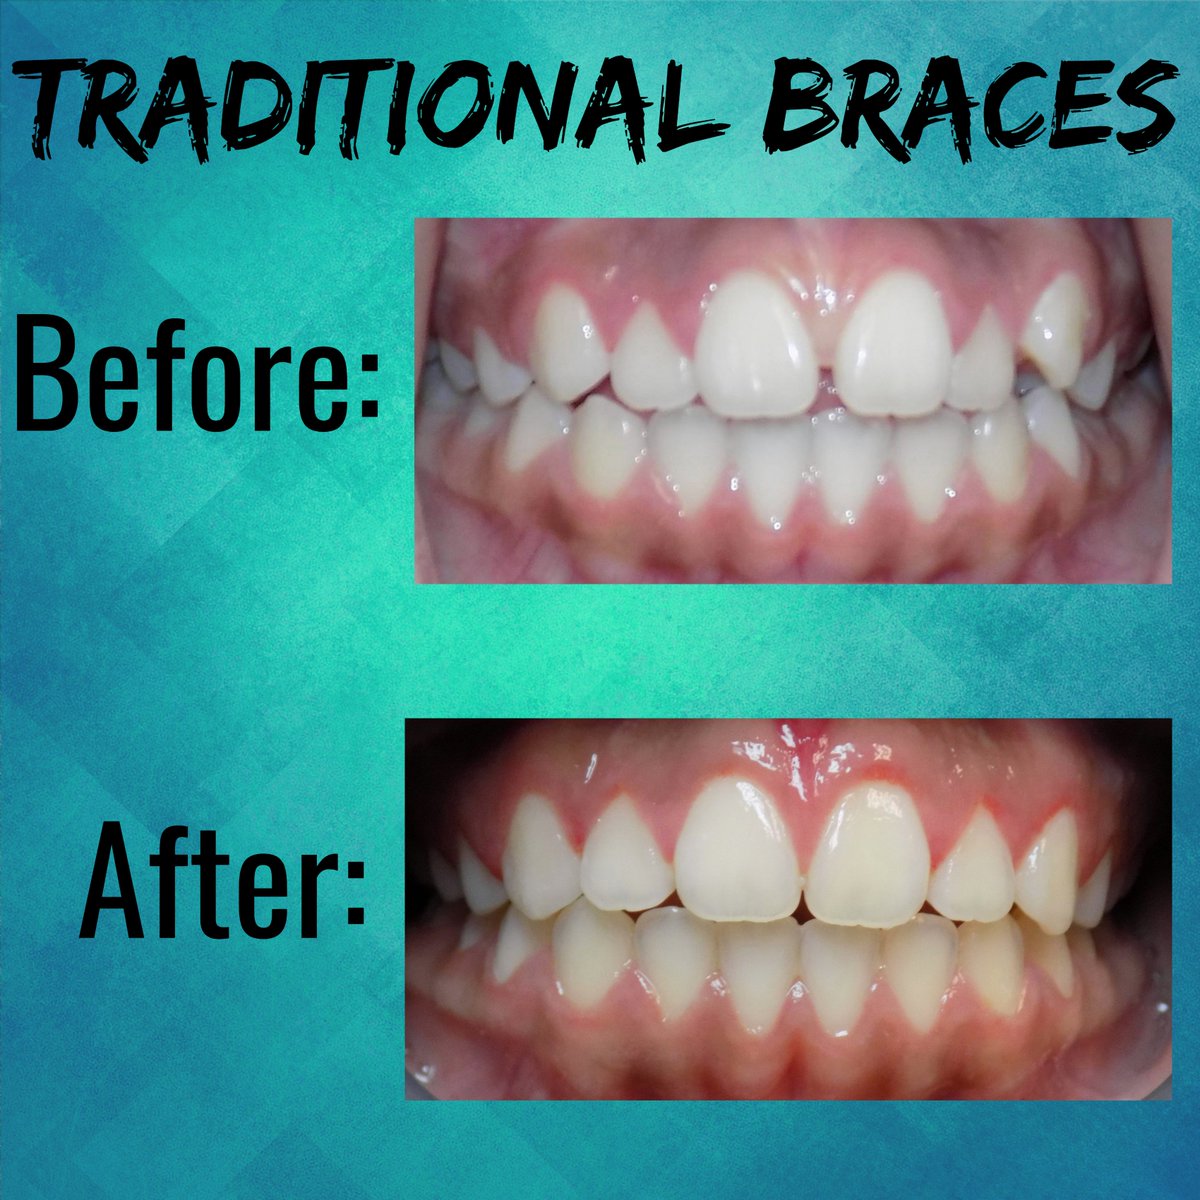 After 2 years of Traditional braces our little patient is ready to show off her pearly whites just in time for high school! 😁
#novandental #traditionalbraces #beforeandafter